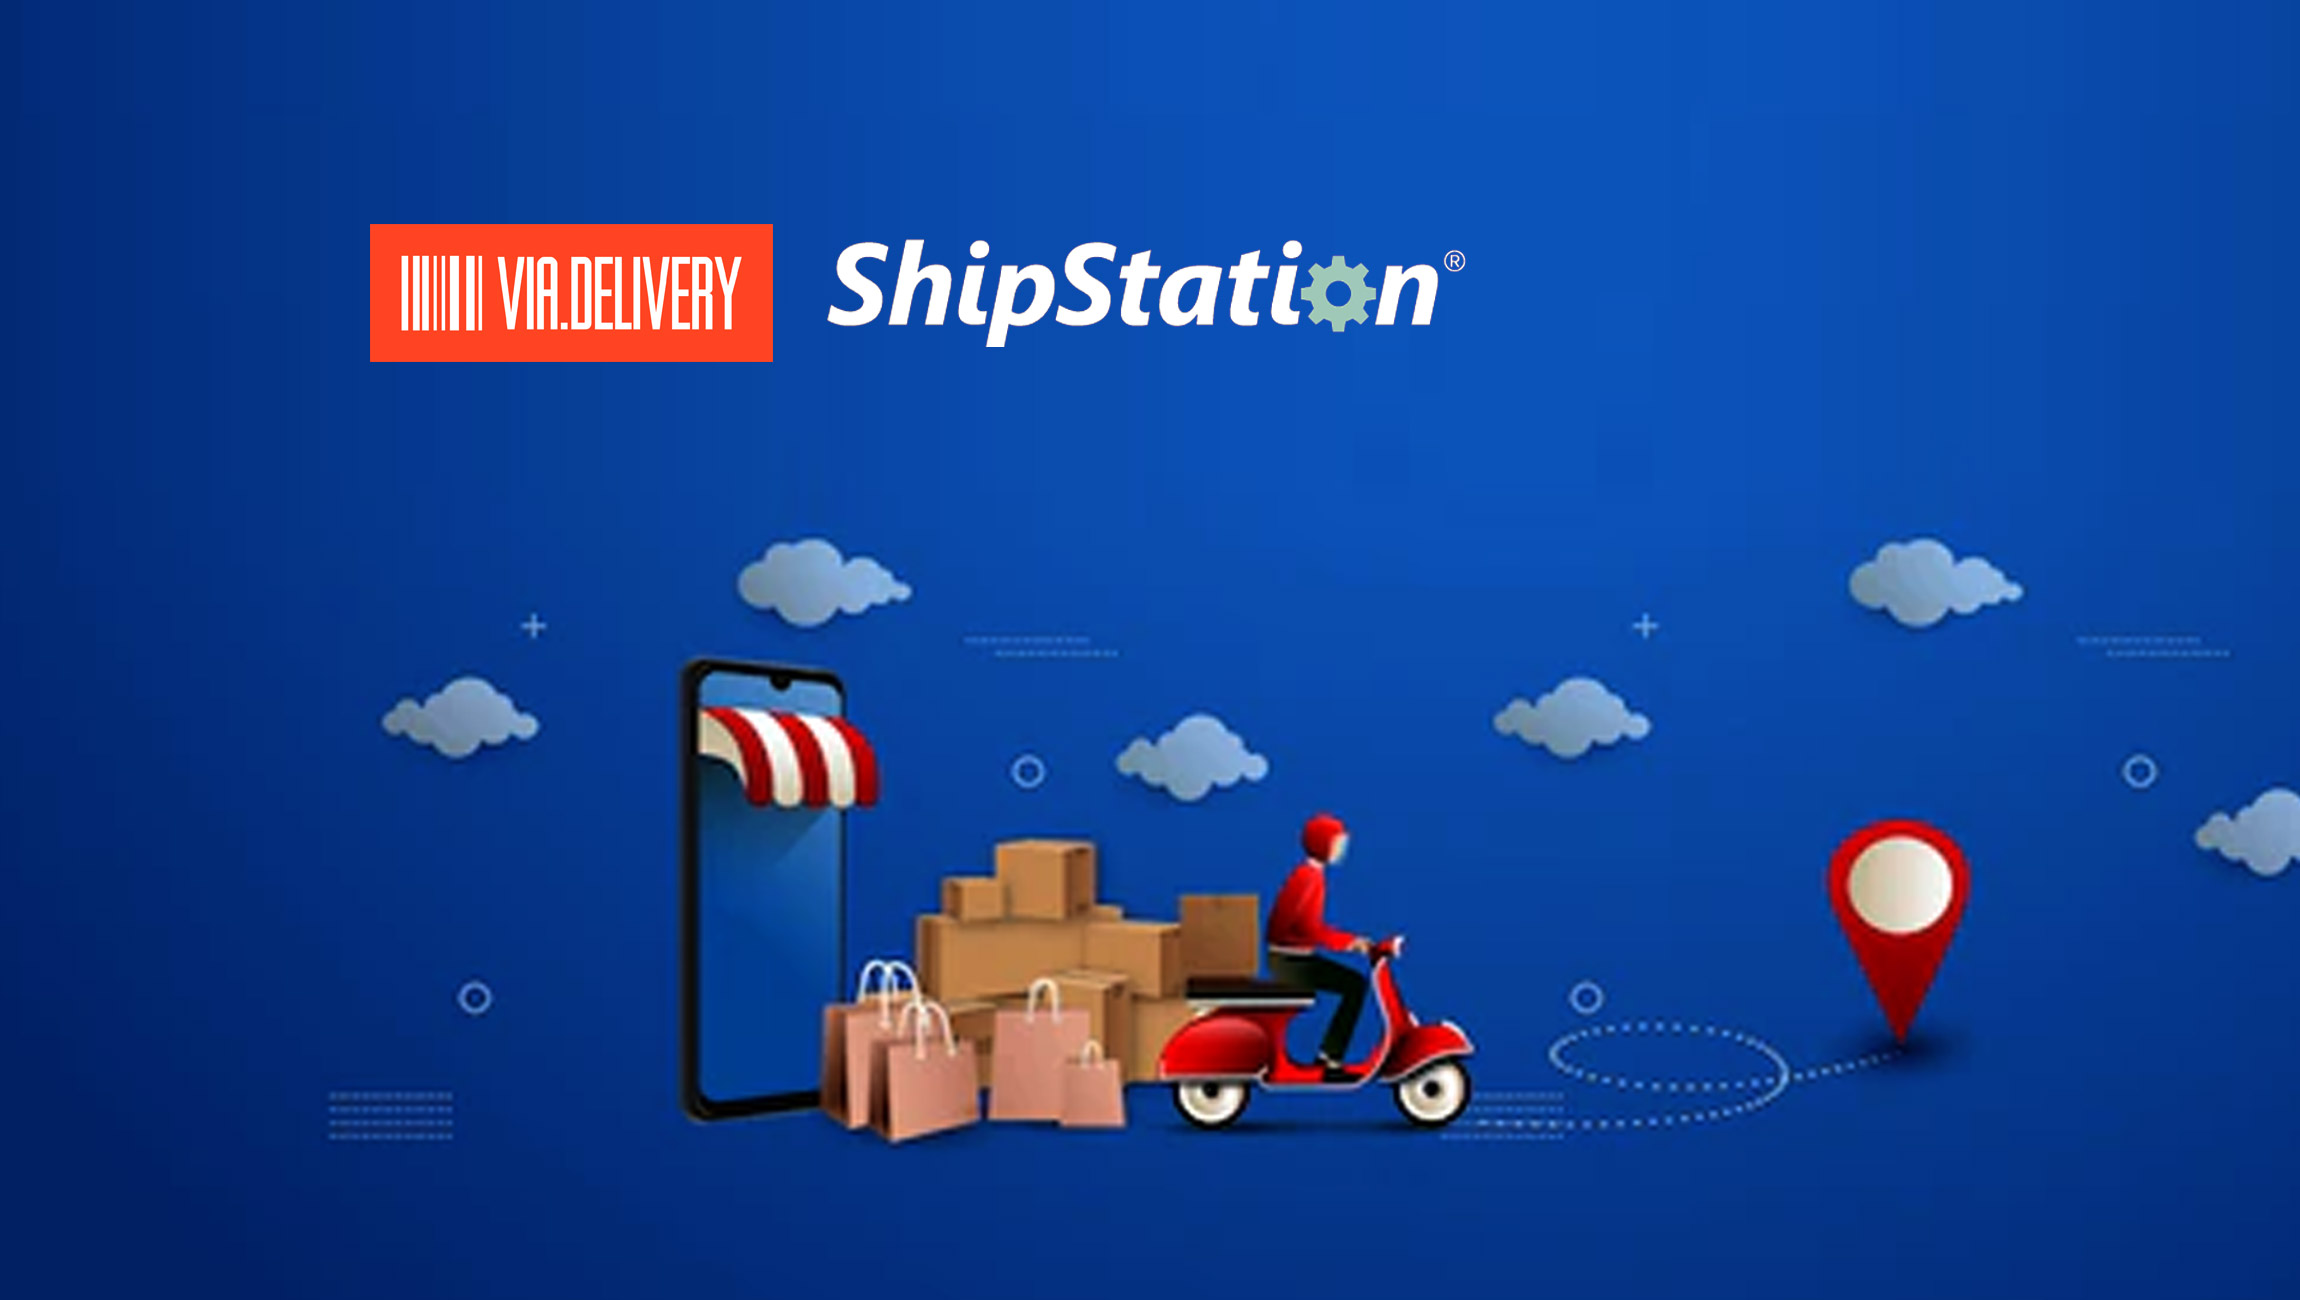 Via.Delivery Announces Integration With ShipStation Expanding Access to Its Buy Online, Pickup Anywhere (BOPA) Network